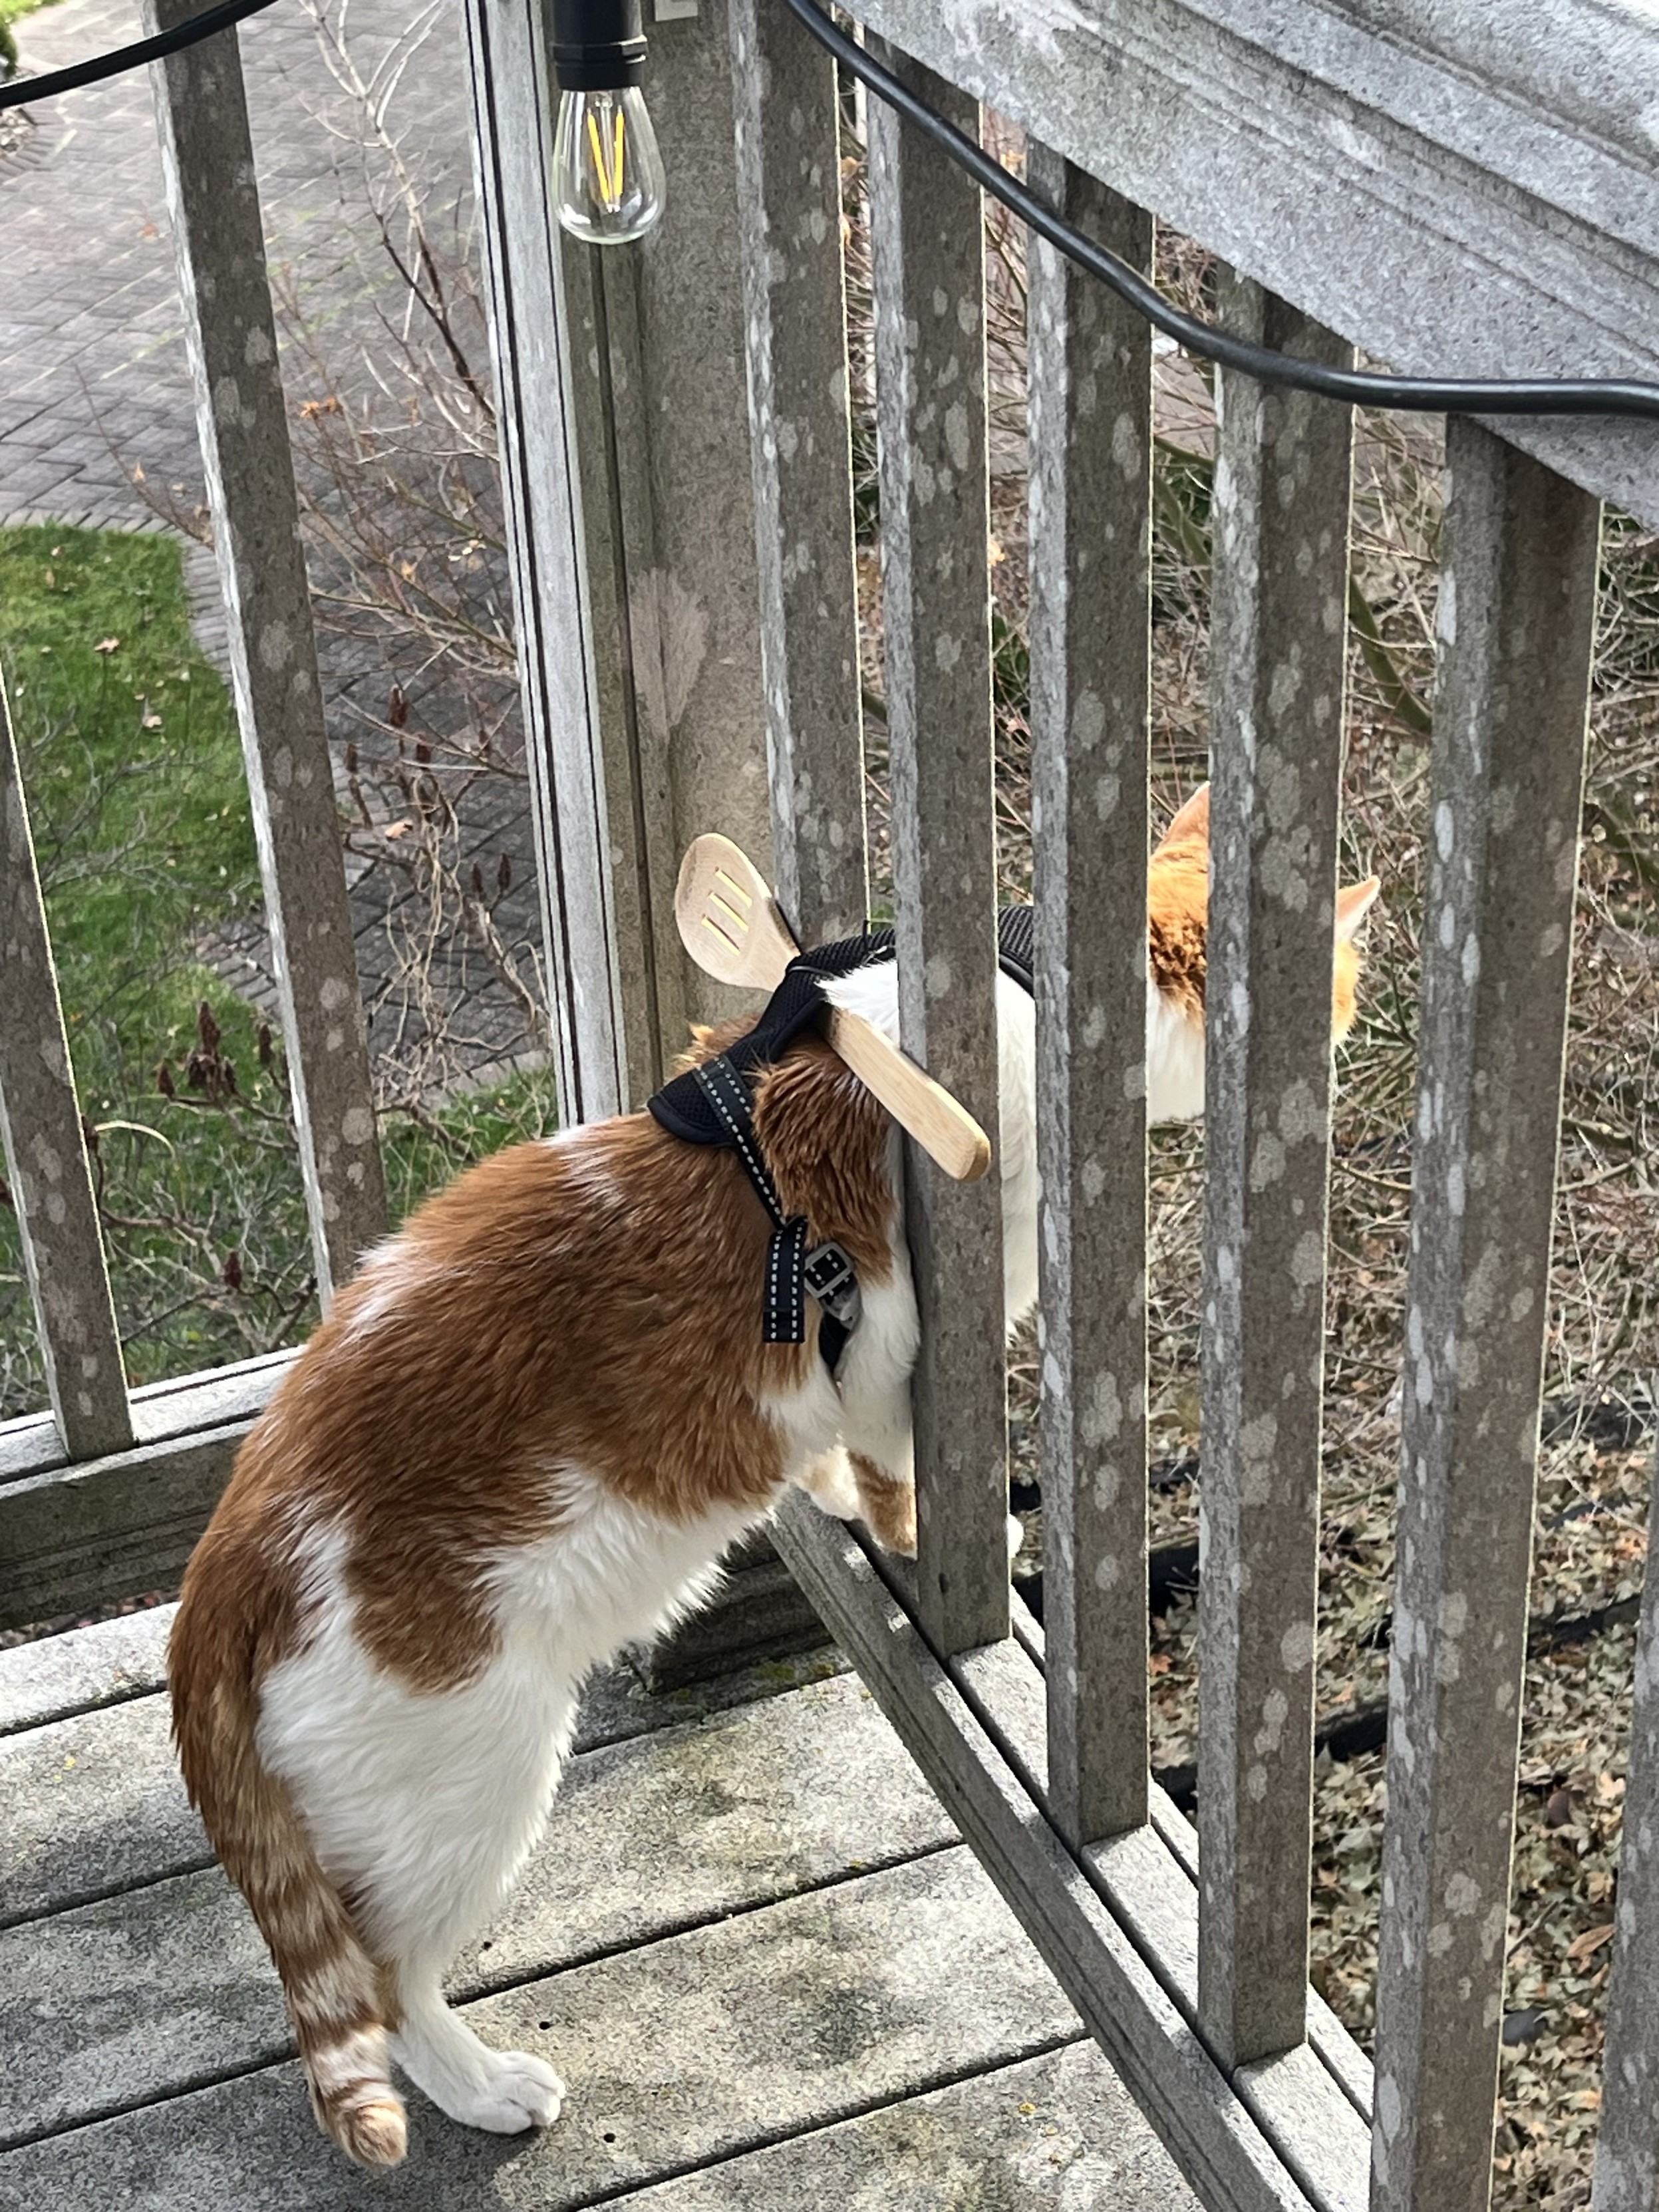 Side view: My cat squeezing out between the vertical rails but can’t go out really far anymore thanks to the horizontal wooden spoon in his harness stopping him. 